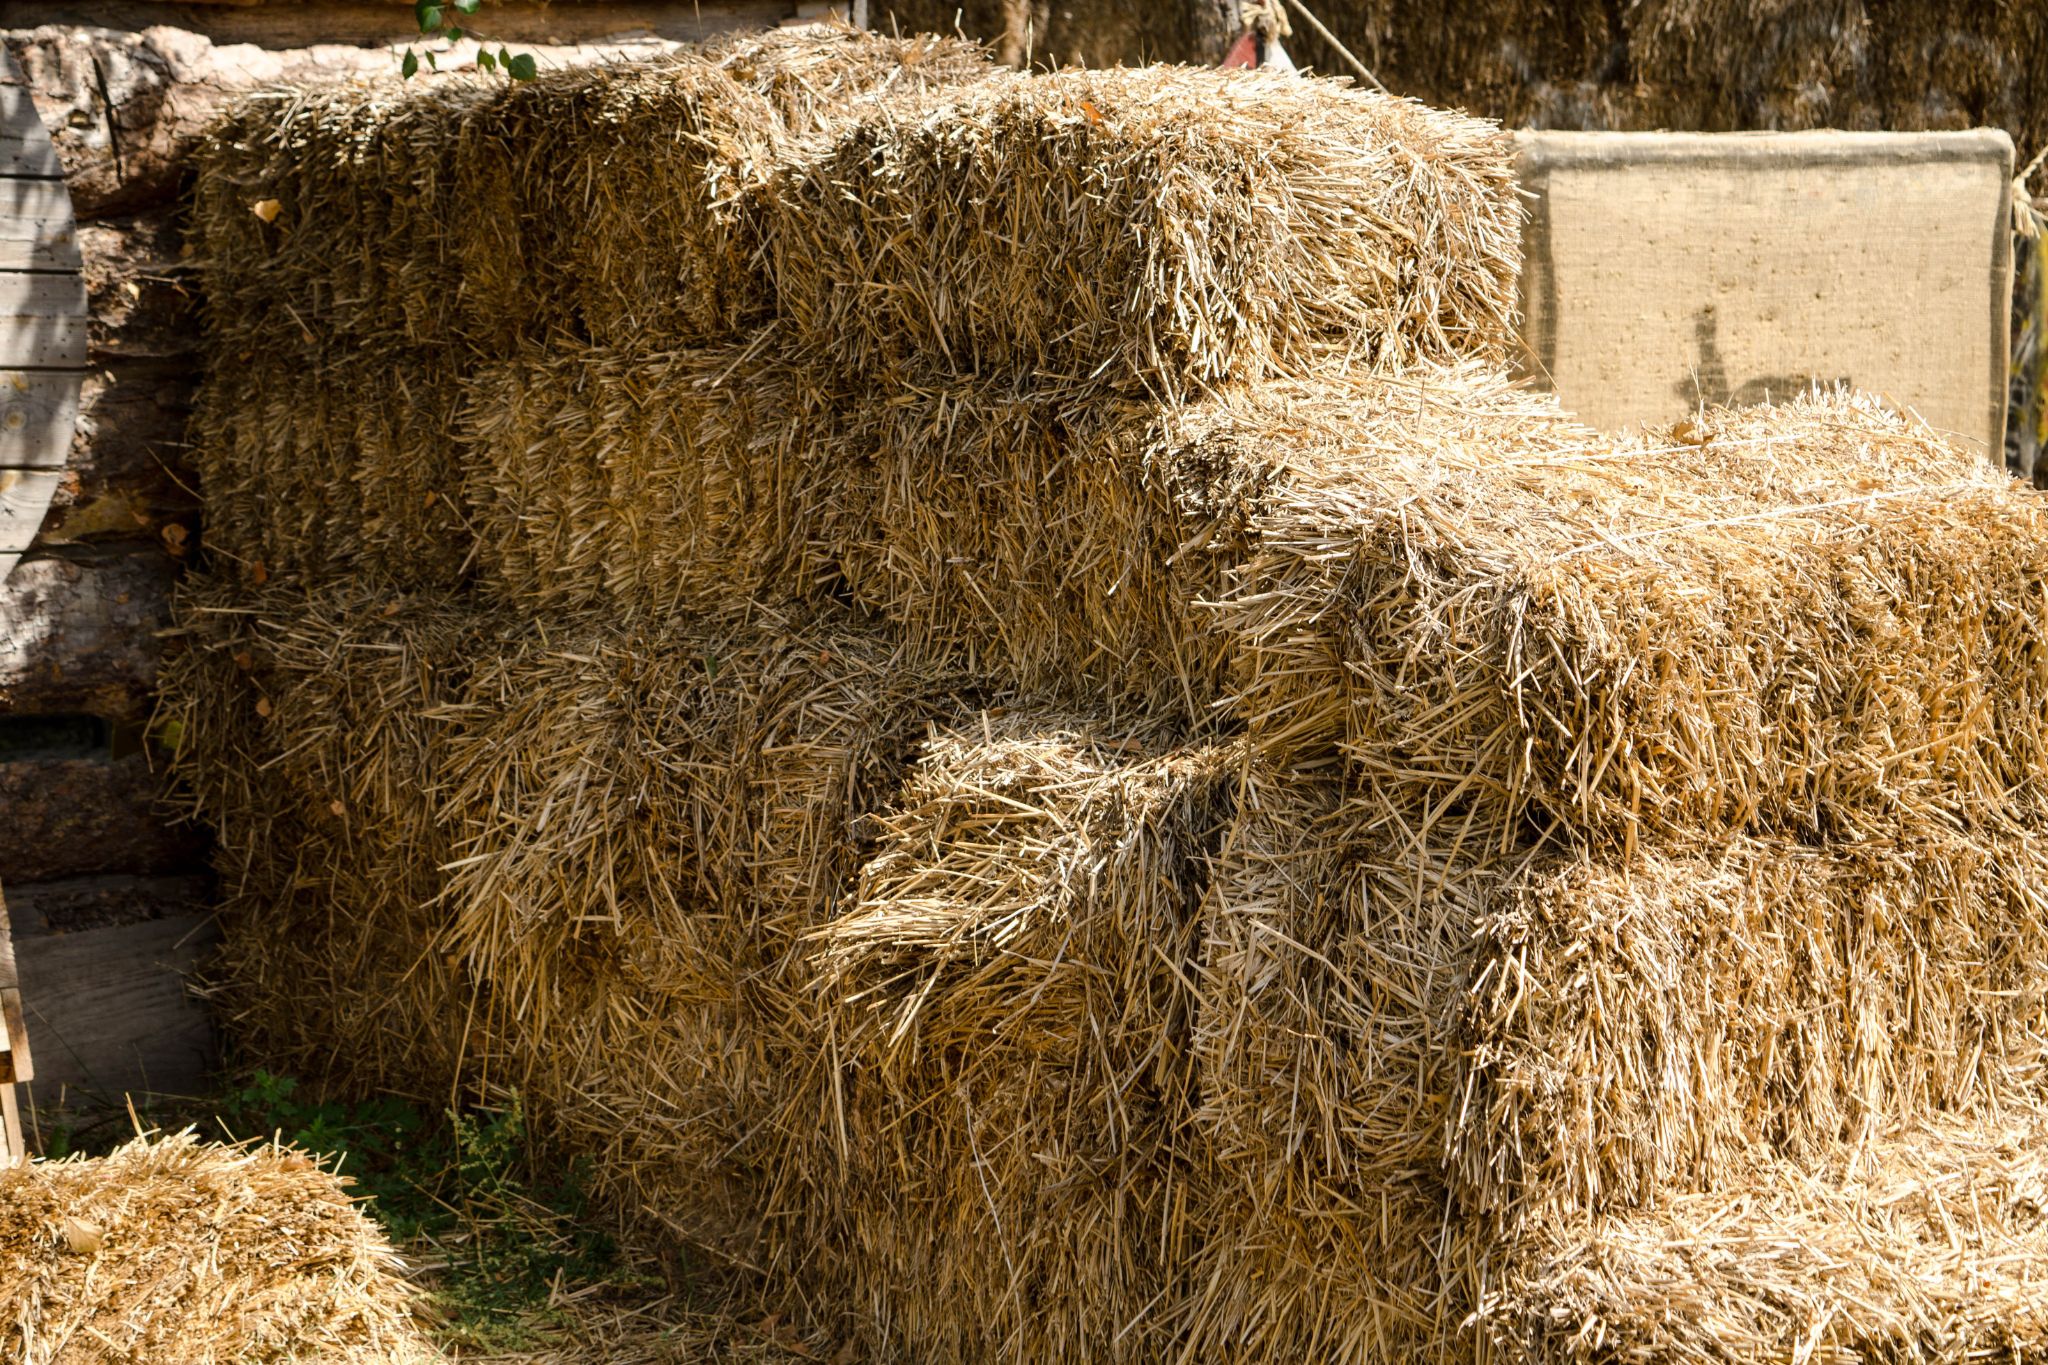 Hay Bale Facts and Figures (Sizes, Types, Costs)